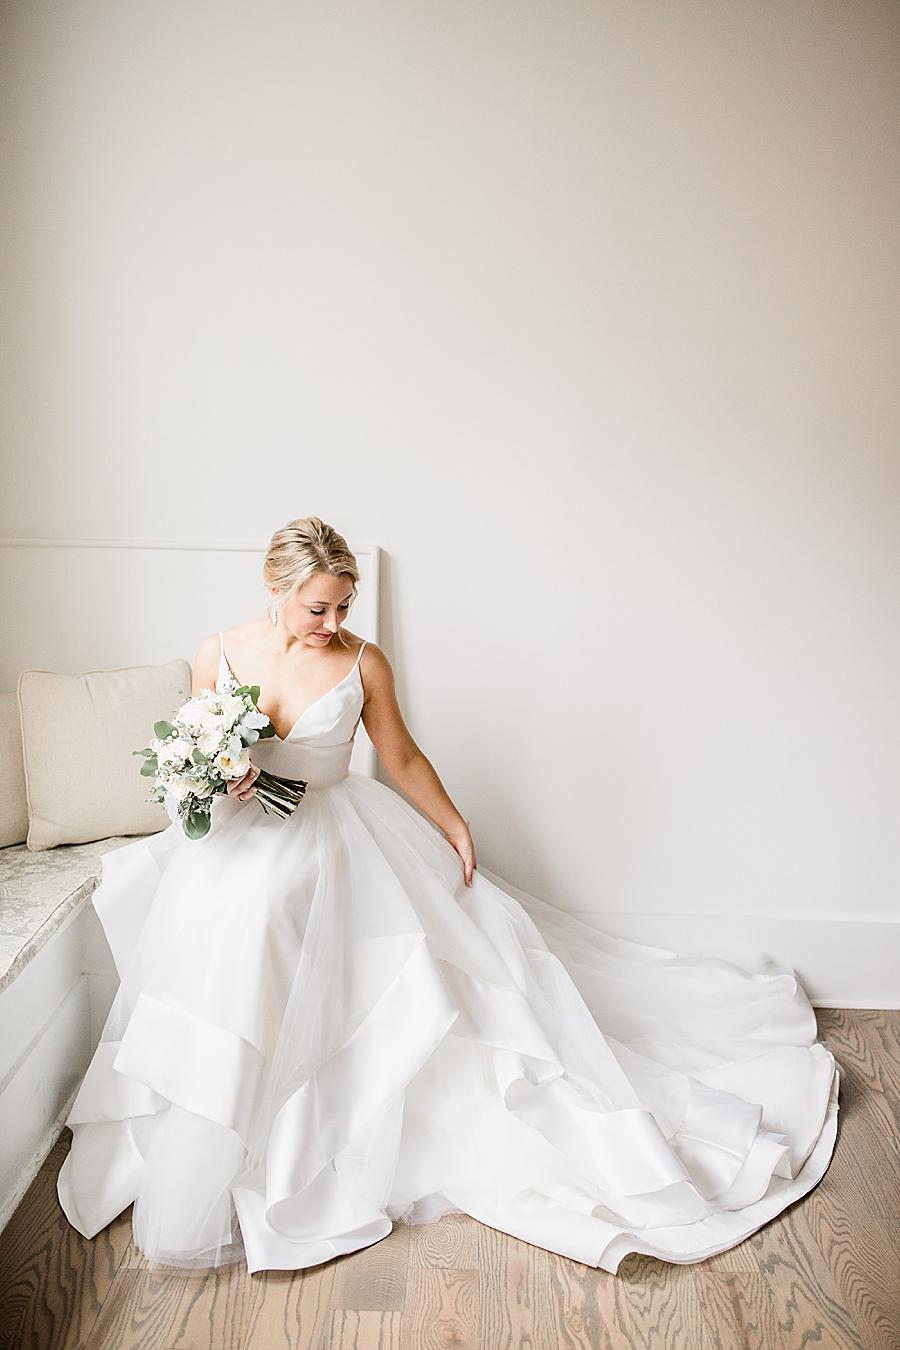 Kleinfeld gown at this bridal session by Knoxville Wedding Photographer, Amanda May Photos.